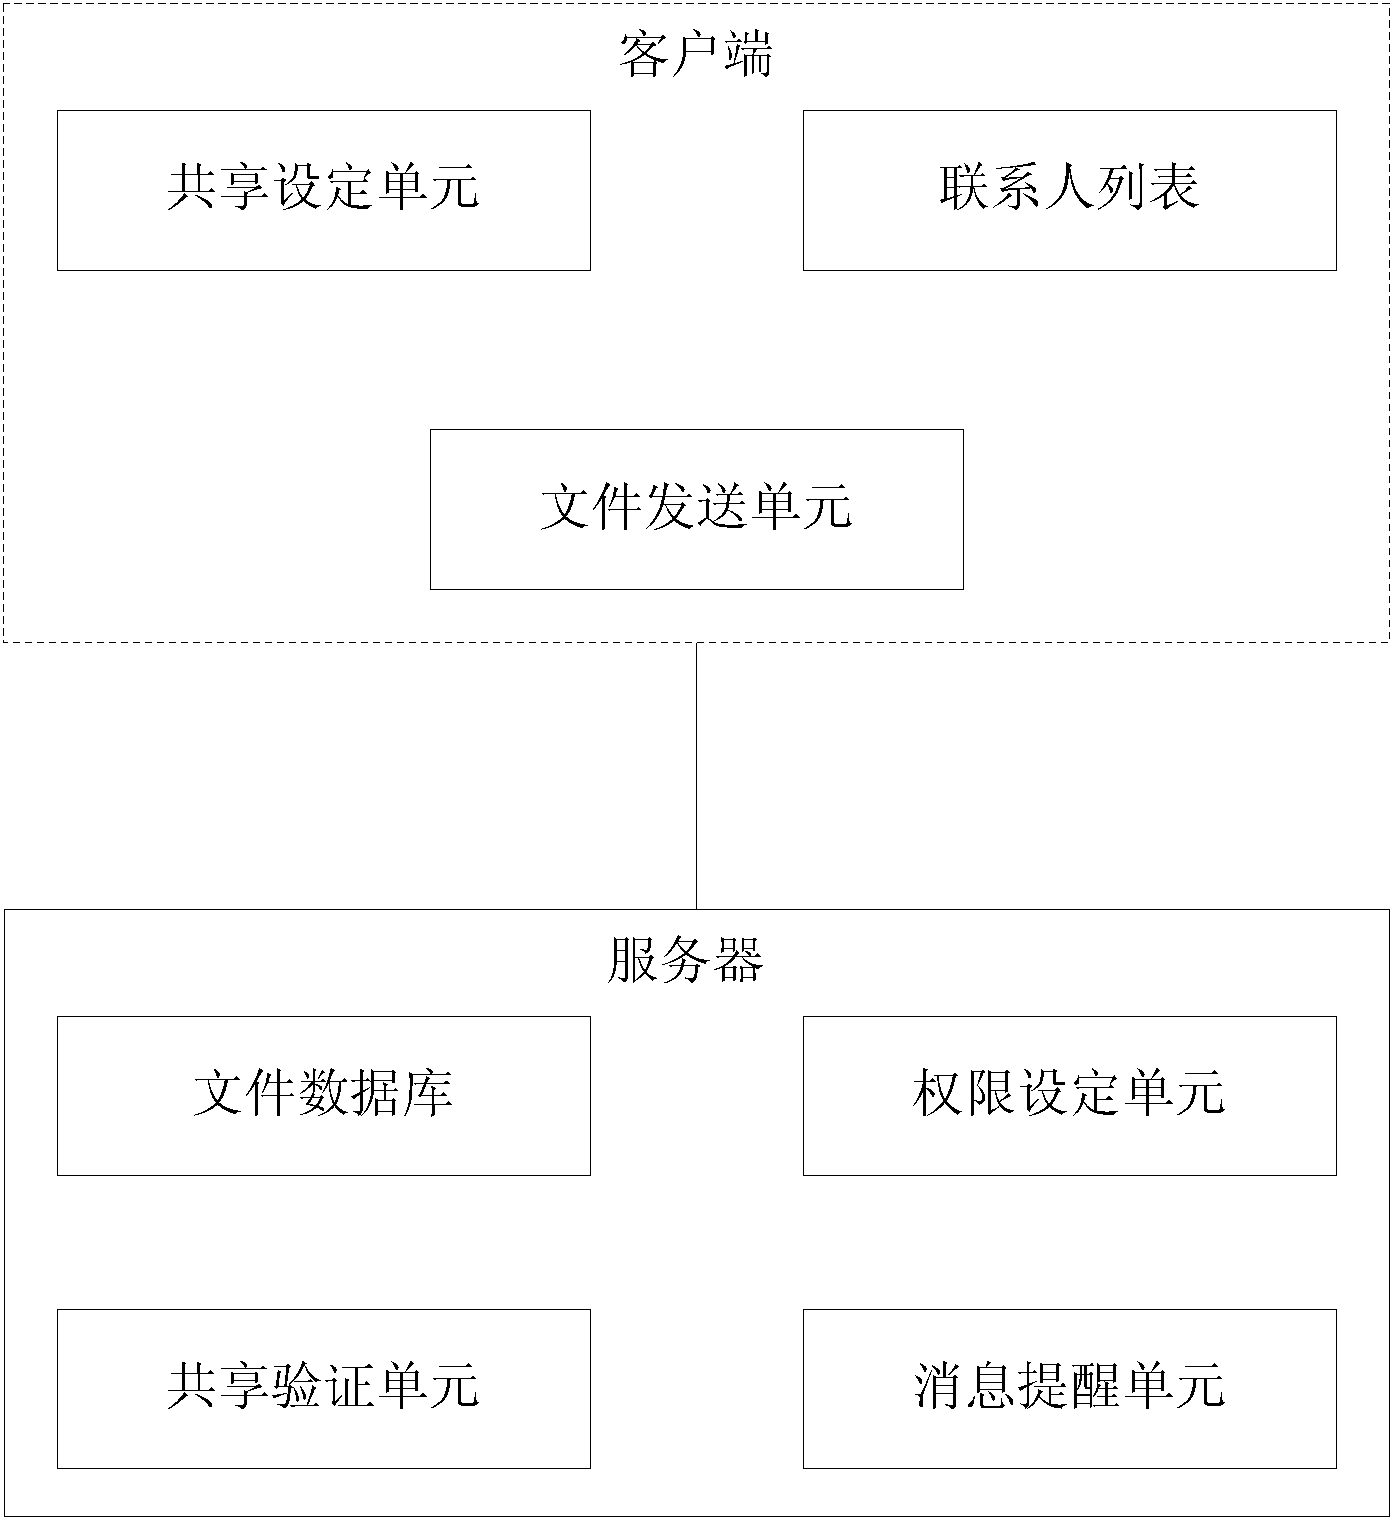 File sharing system and method, and network information integration system and method